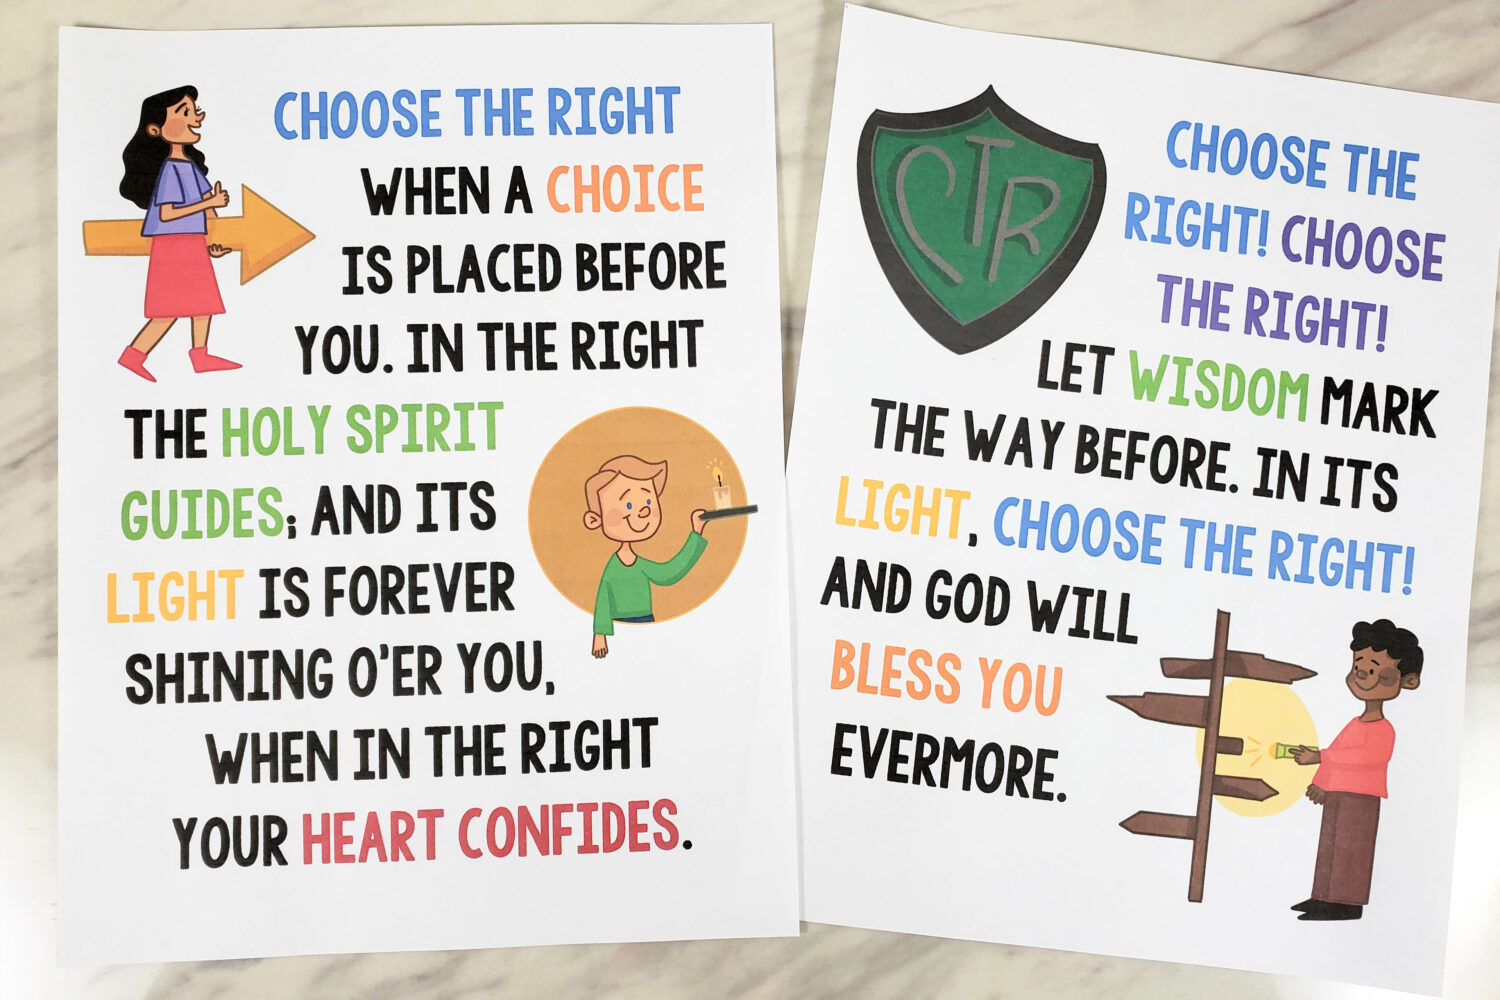 Choose the Right Flip Chart - Teach this song with these beautiful custom art picture illustrations and visual aids that coordinate with the lyrics. Includes both color and black and white plus a slideshow. A great resource for LDS Primary music leaders or for home Come Follow Me use for families.